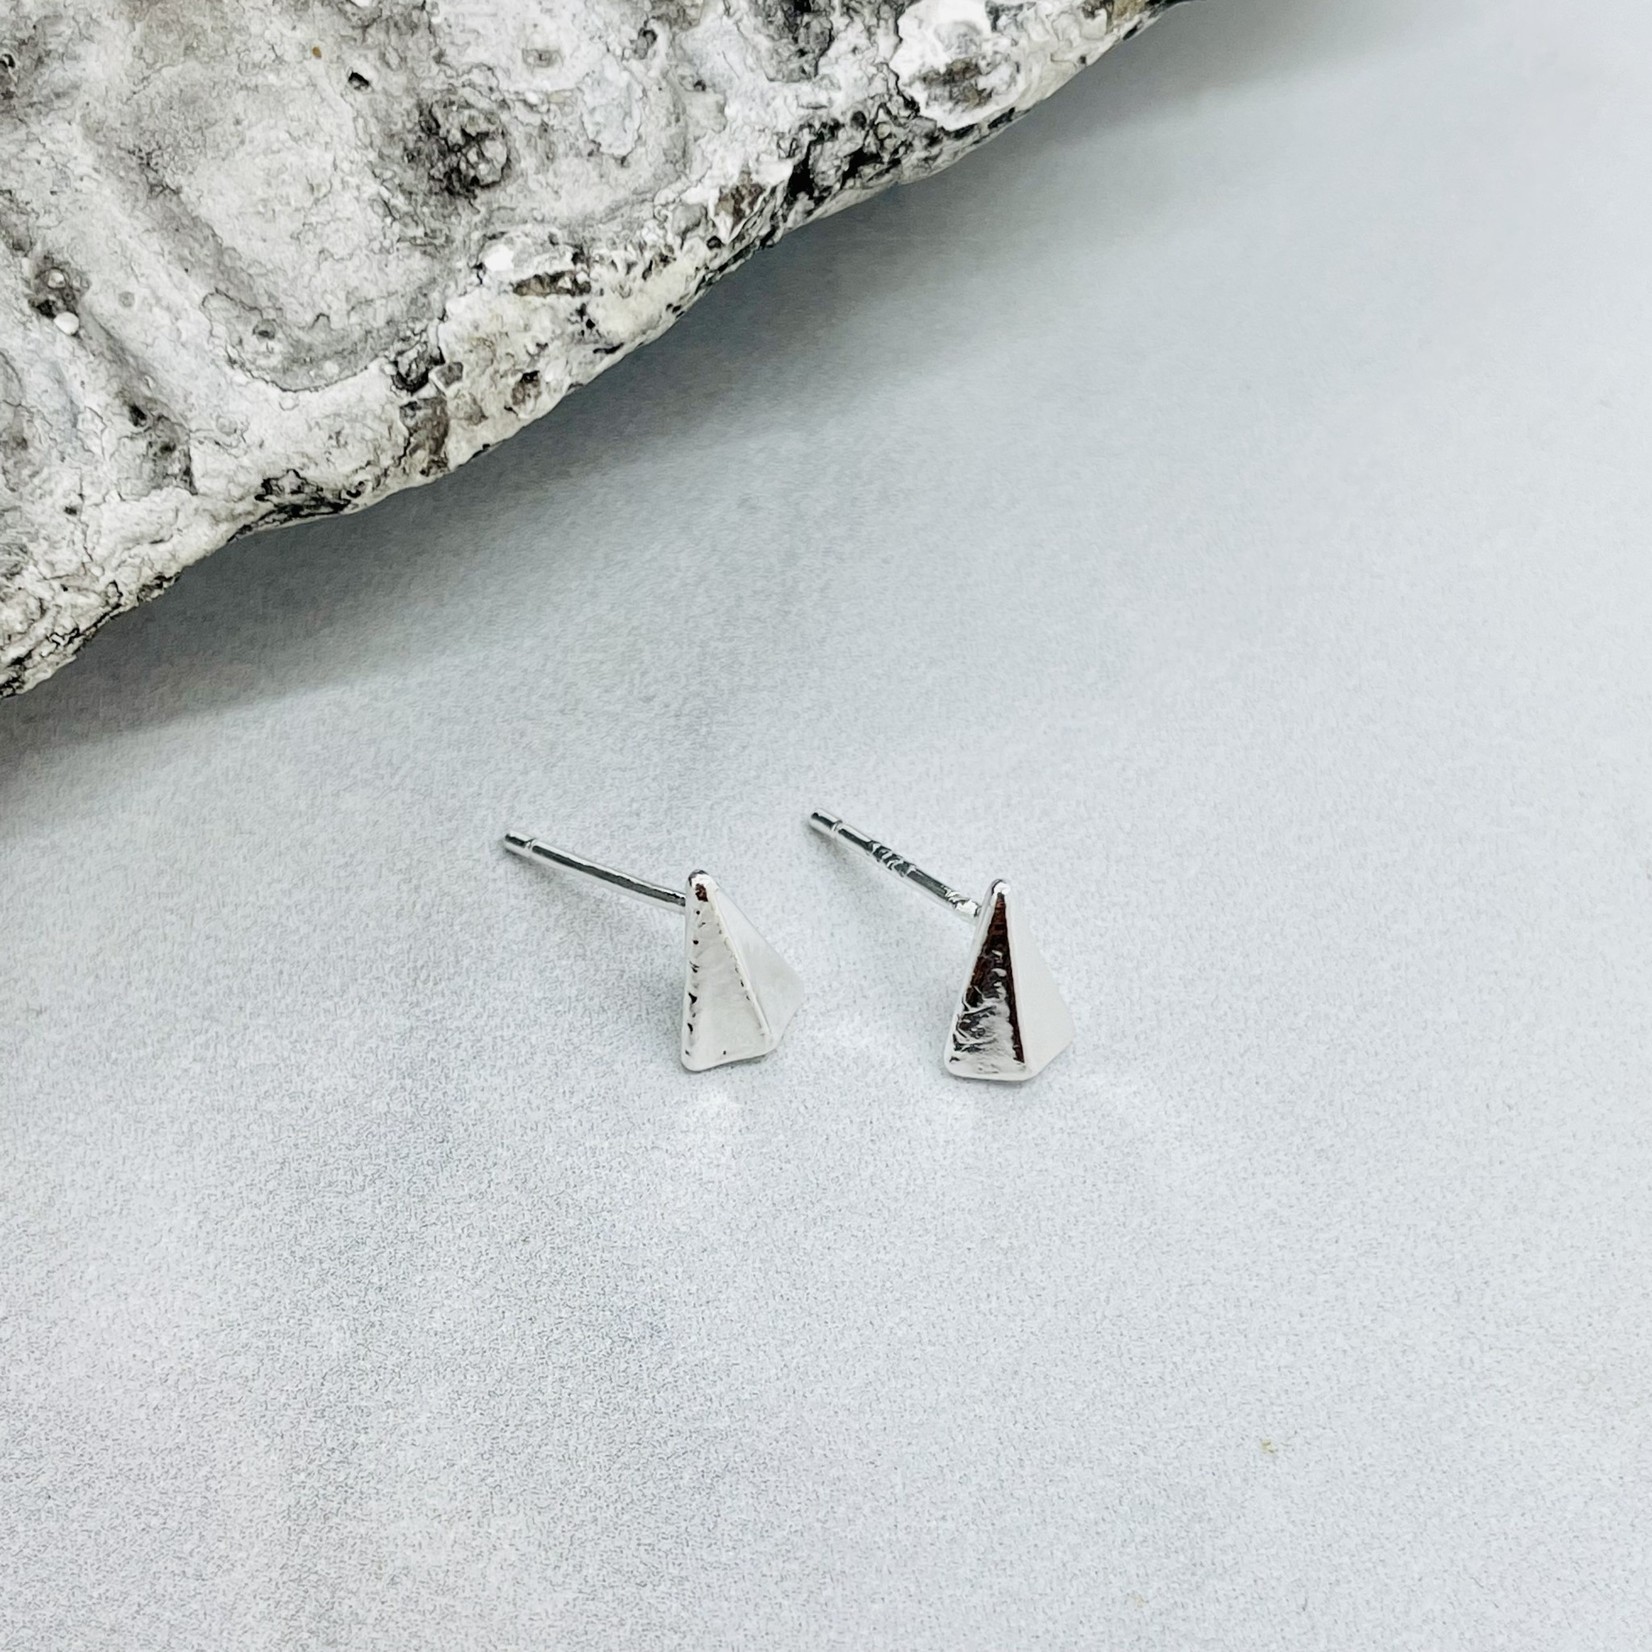 A.M. Jewelry Tiny Silver Paper Plane Earrings